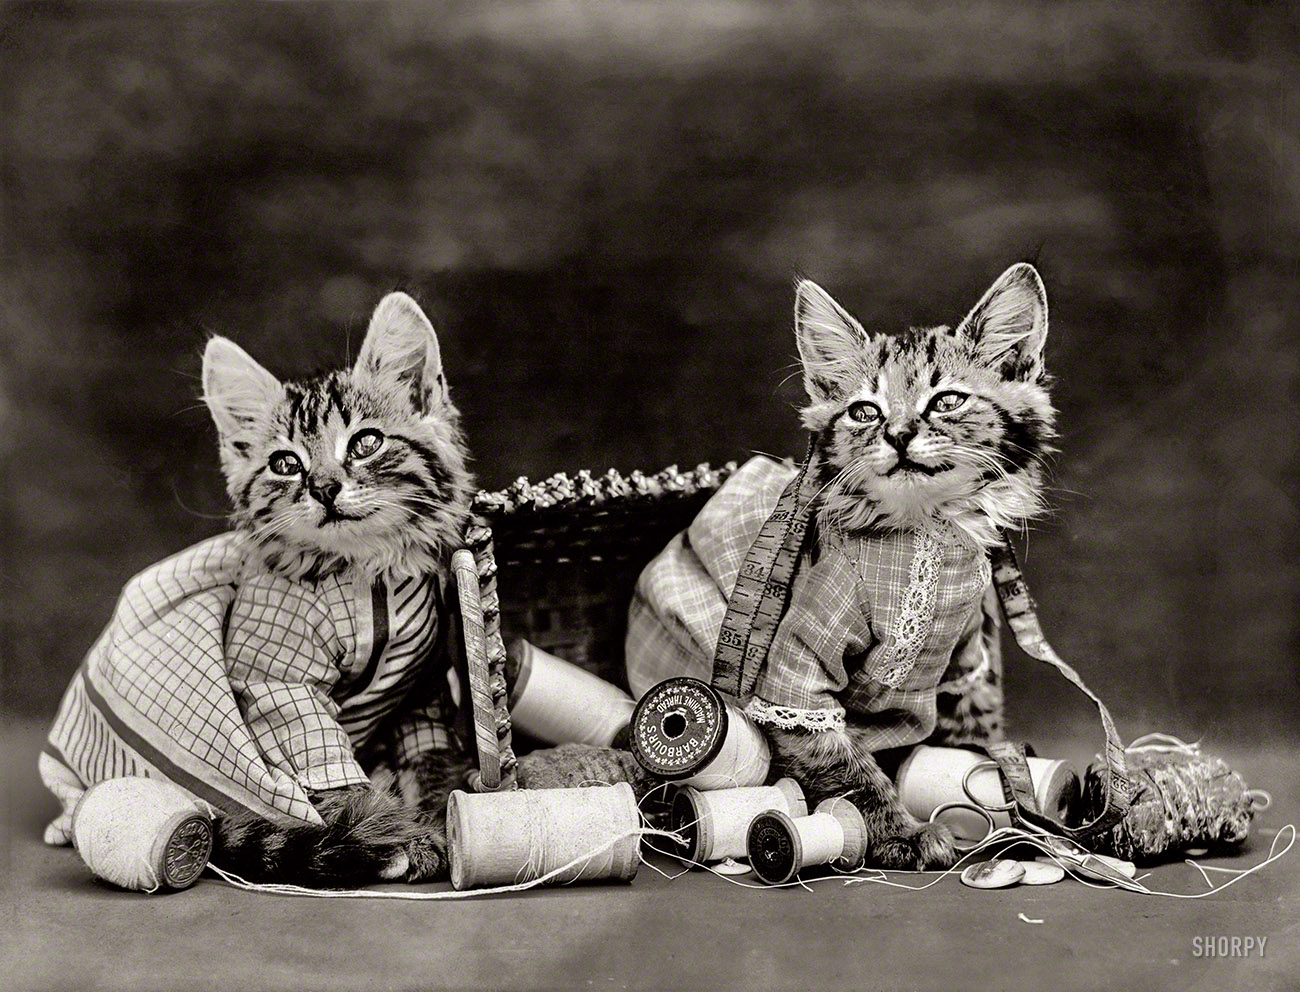 1914. "Costumed kittens with thread and scissors in overturned sewing basket." Photo by that auteur of feline folderol, Harry W. Frees. View full size.